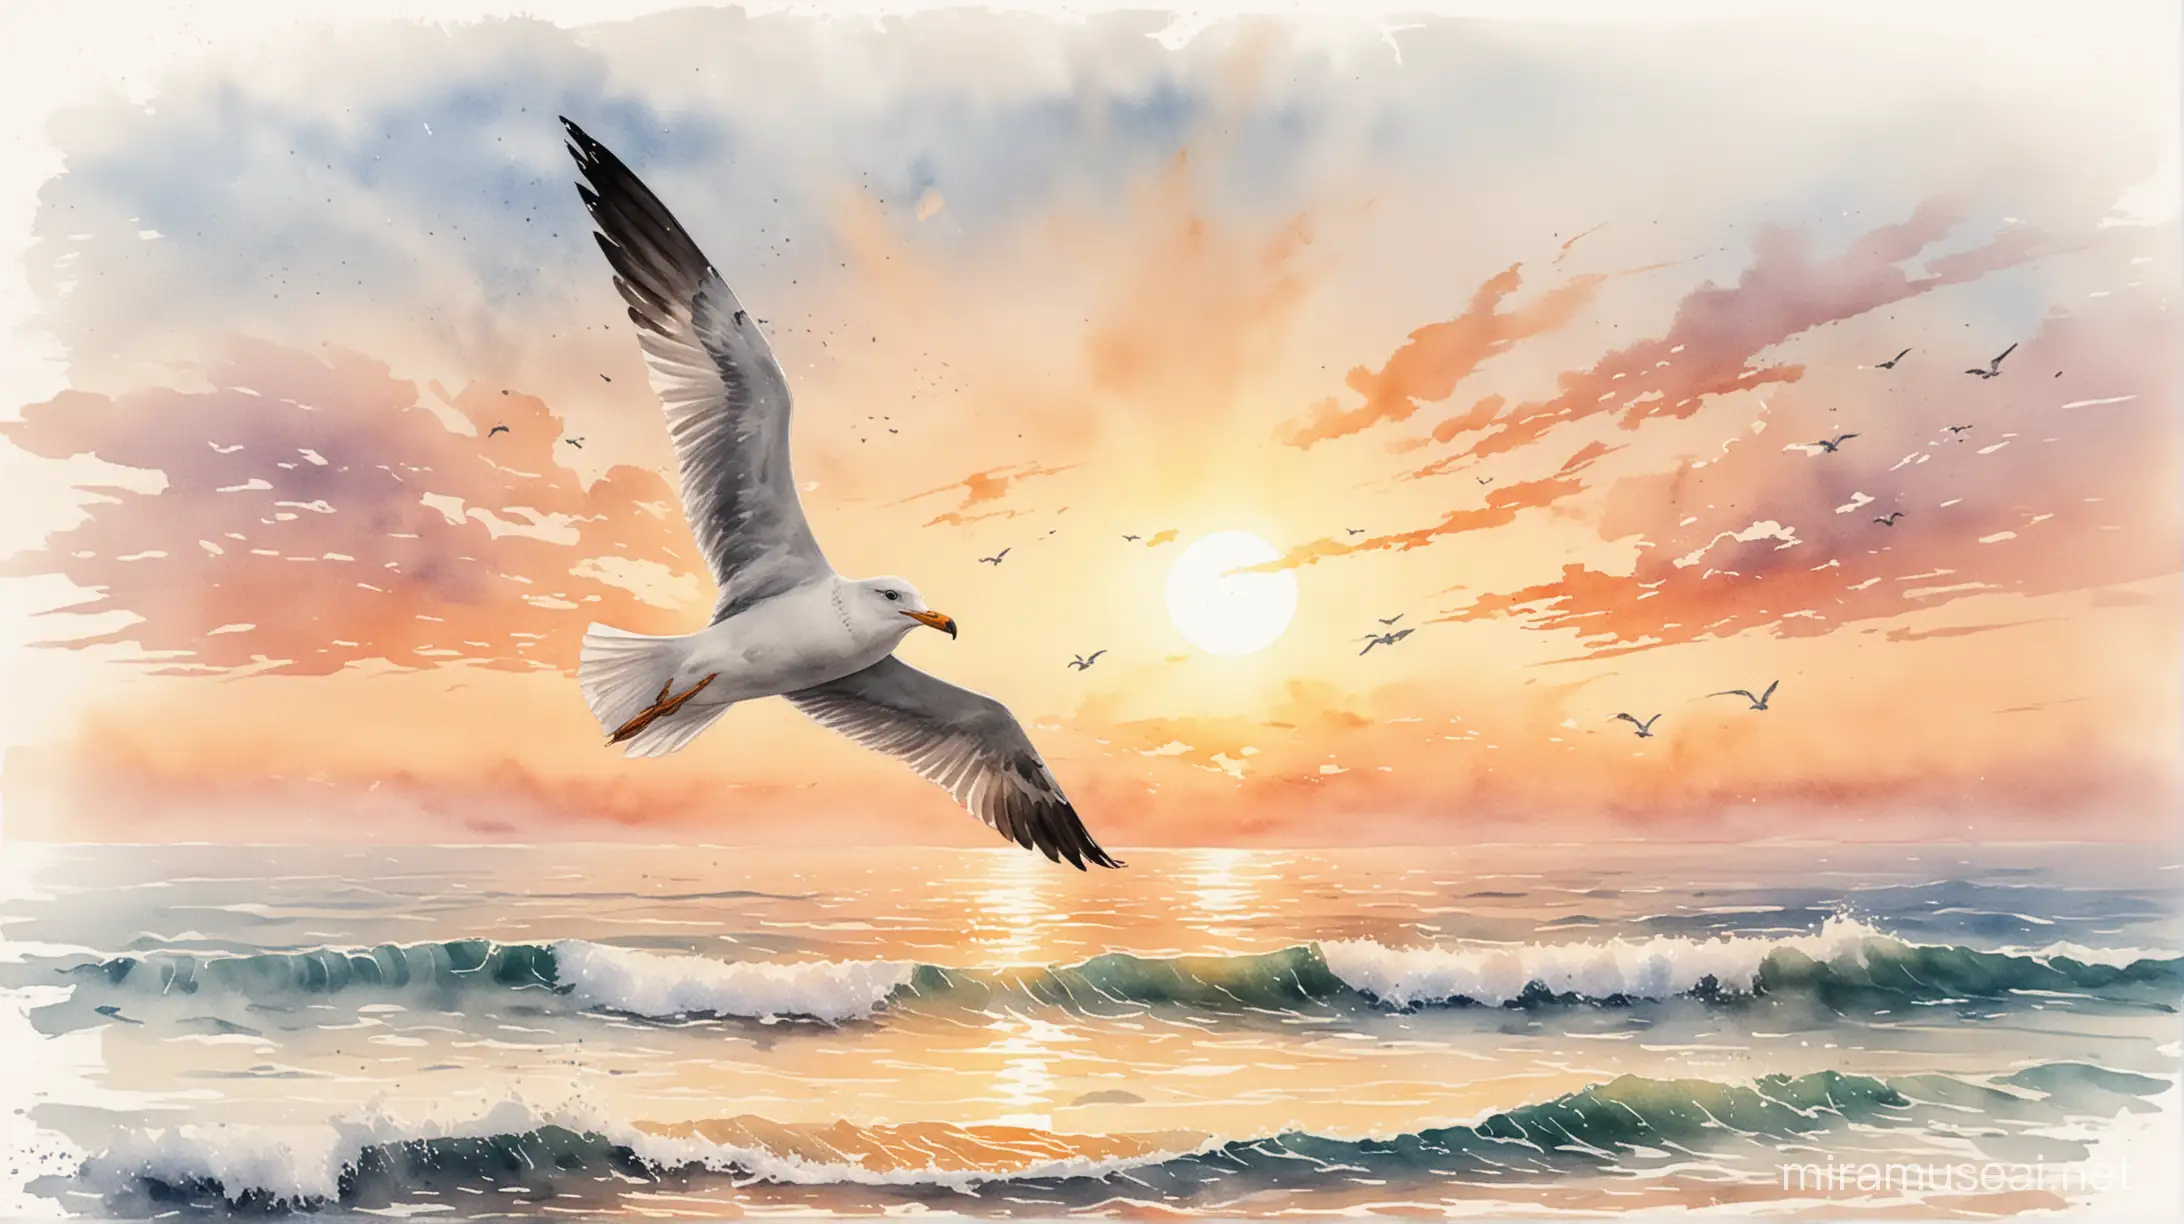 Seagull Flying at Sunrise Retro Watercolor Painting